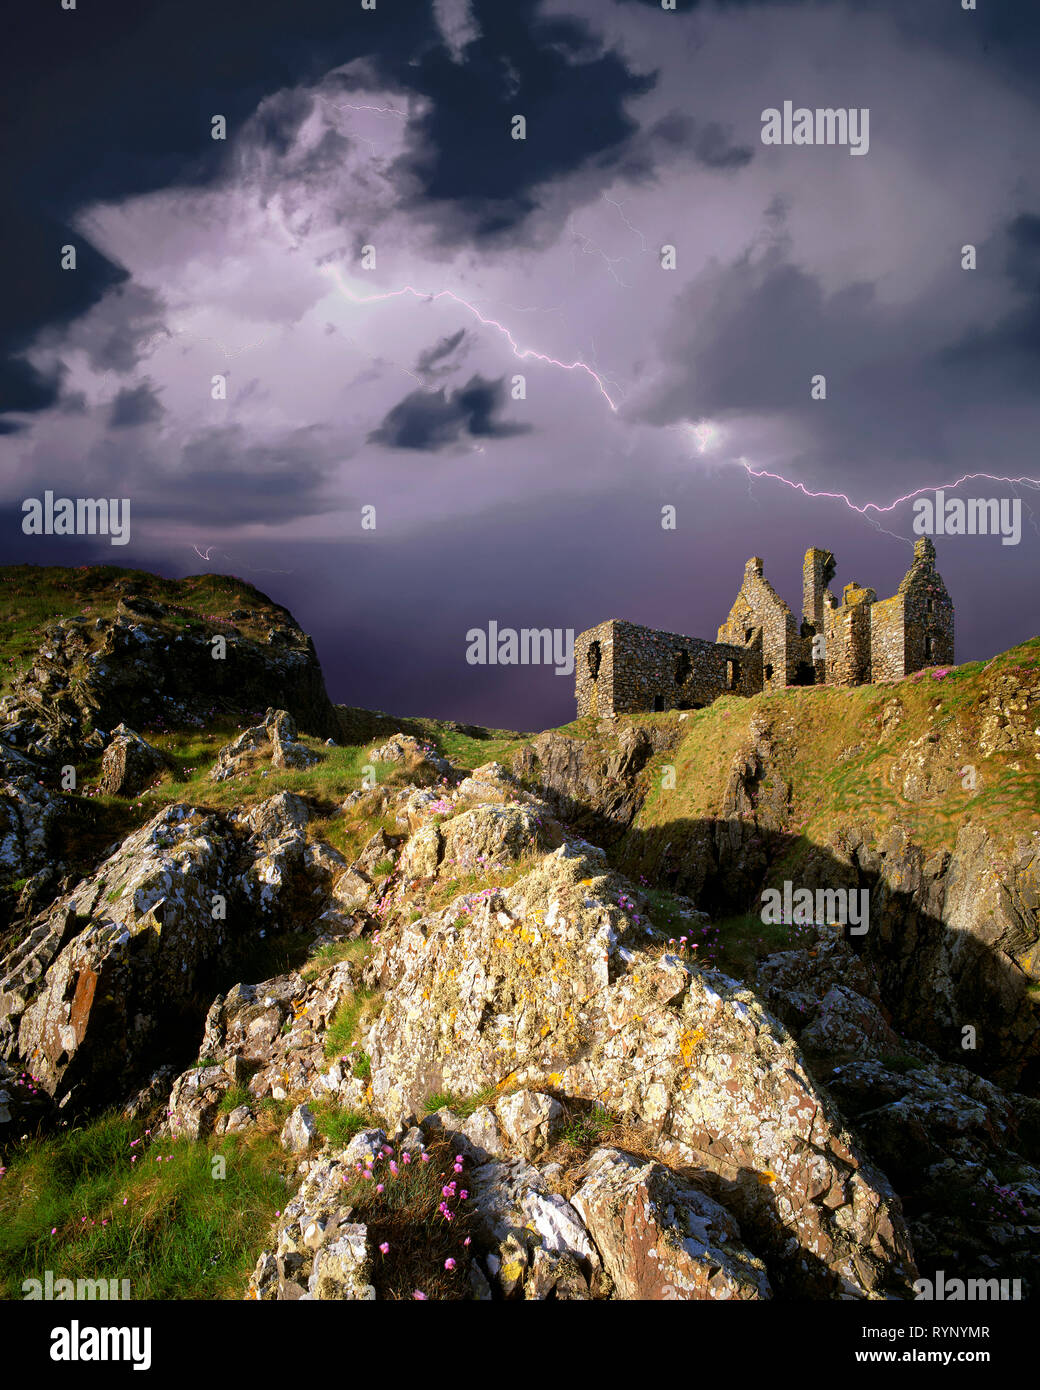 GB - SCOTLAND: Dunskey Castle in Dumfries & Galloway Stock Photo